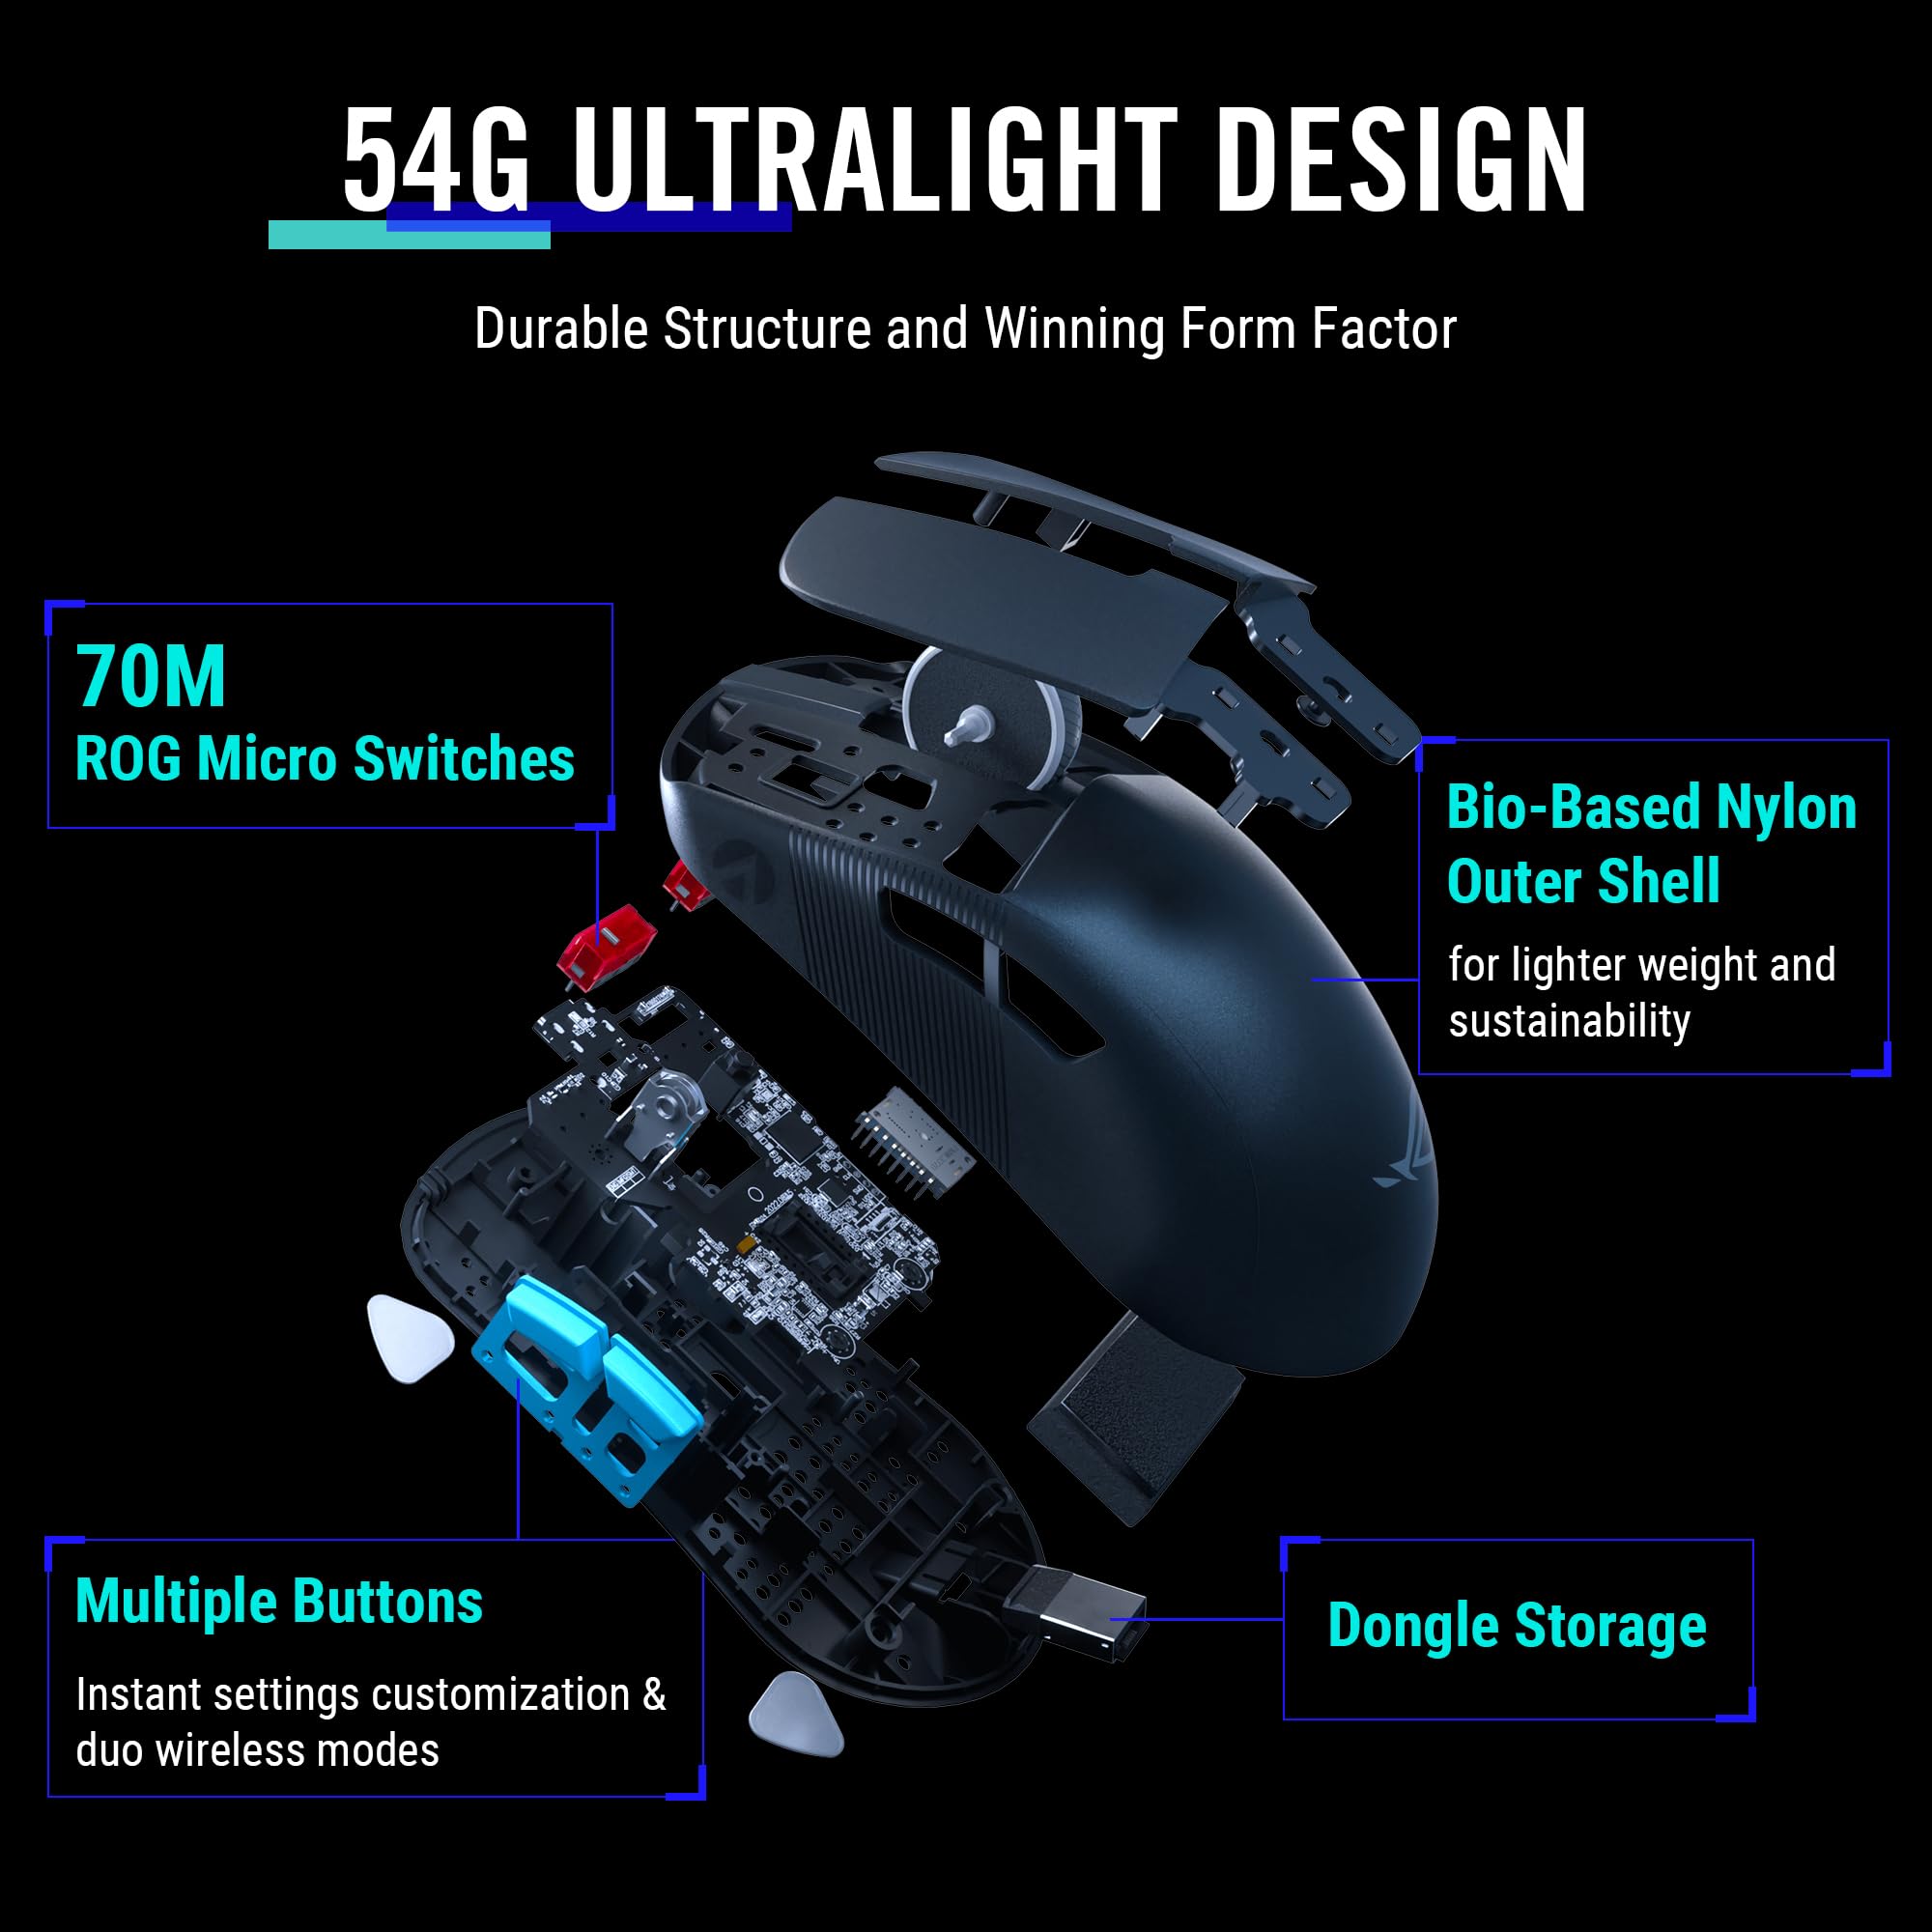 ASUS ROG Harpe Ace Aim Lab Edition Gaming Mouse, 54 g Ultra-Lightwieght, Connectivity (2.4GHz RF, Bluetooth, Wired), 36K DPI Sensor, 5 Programmable Buttons, ROG SpeedNova, Esports & FPS Gaming, Black